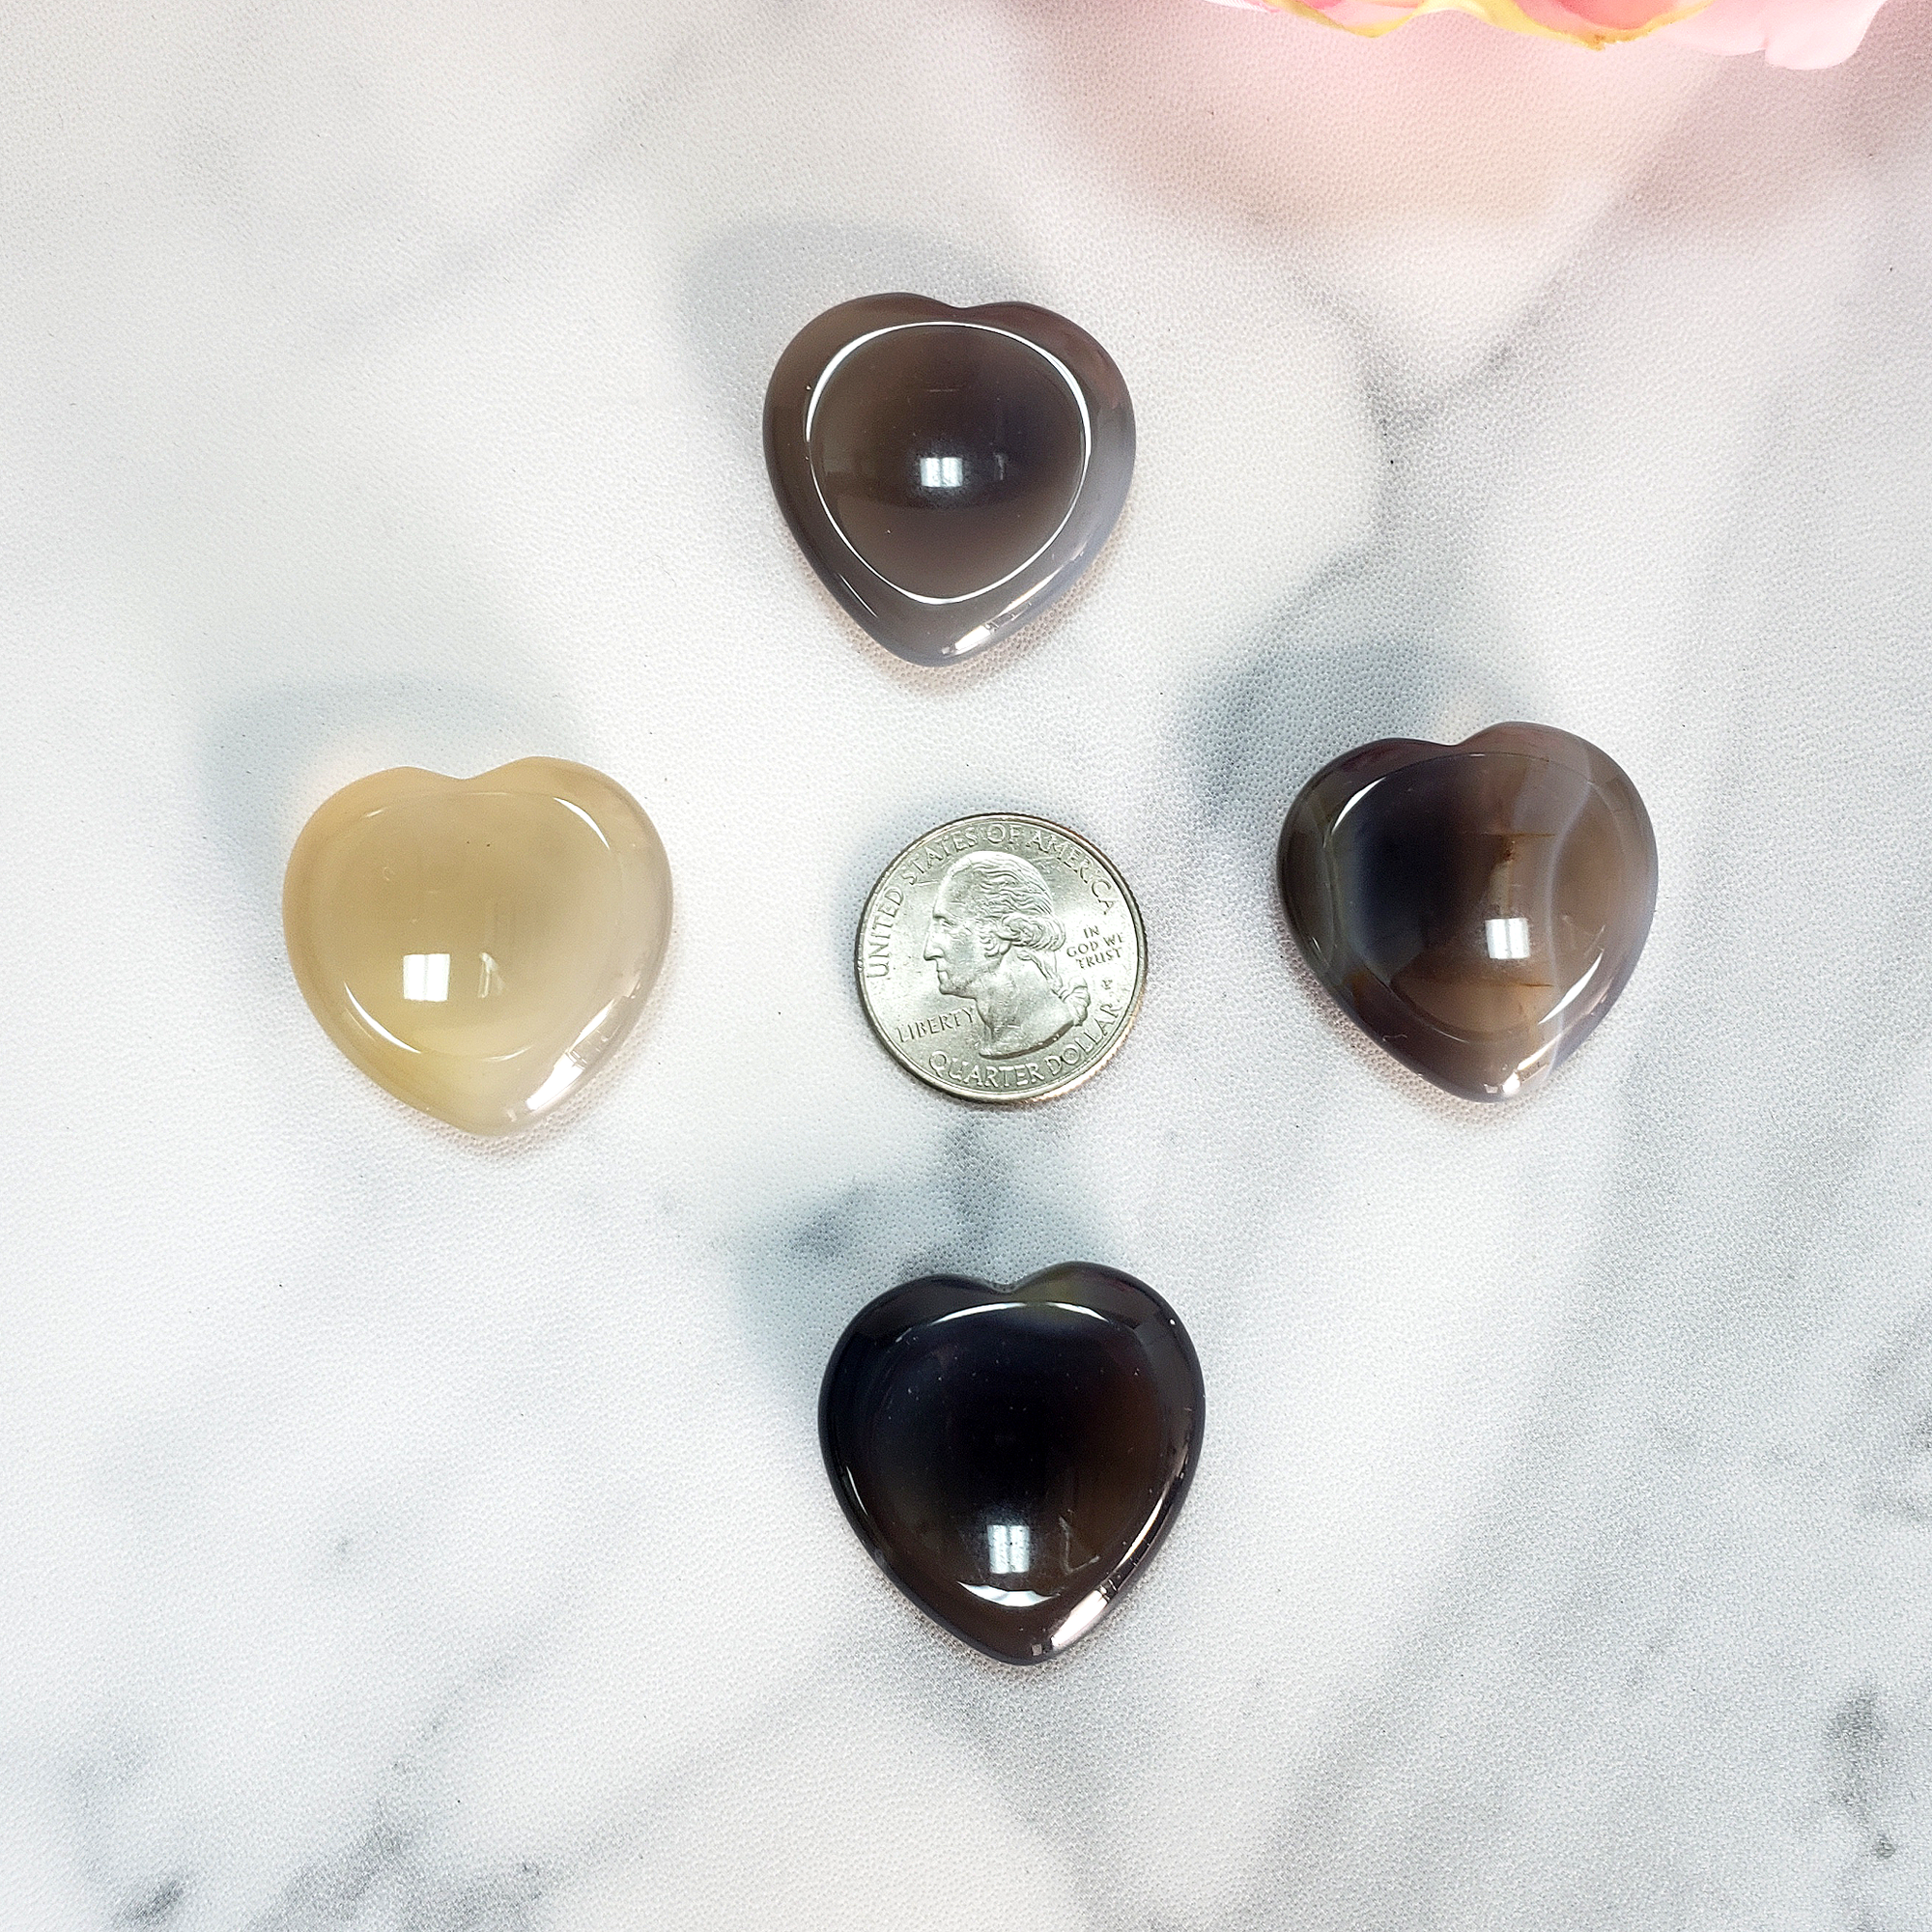 Grey Chalcedony Stone Crystal Heart Shaped Worry Stone - Size Comparison